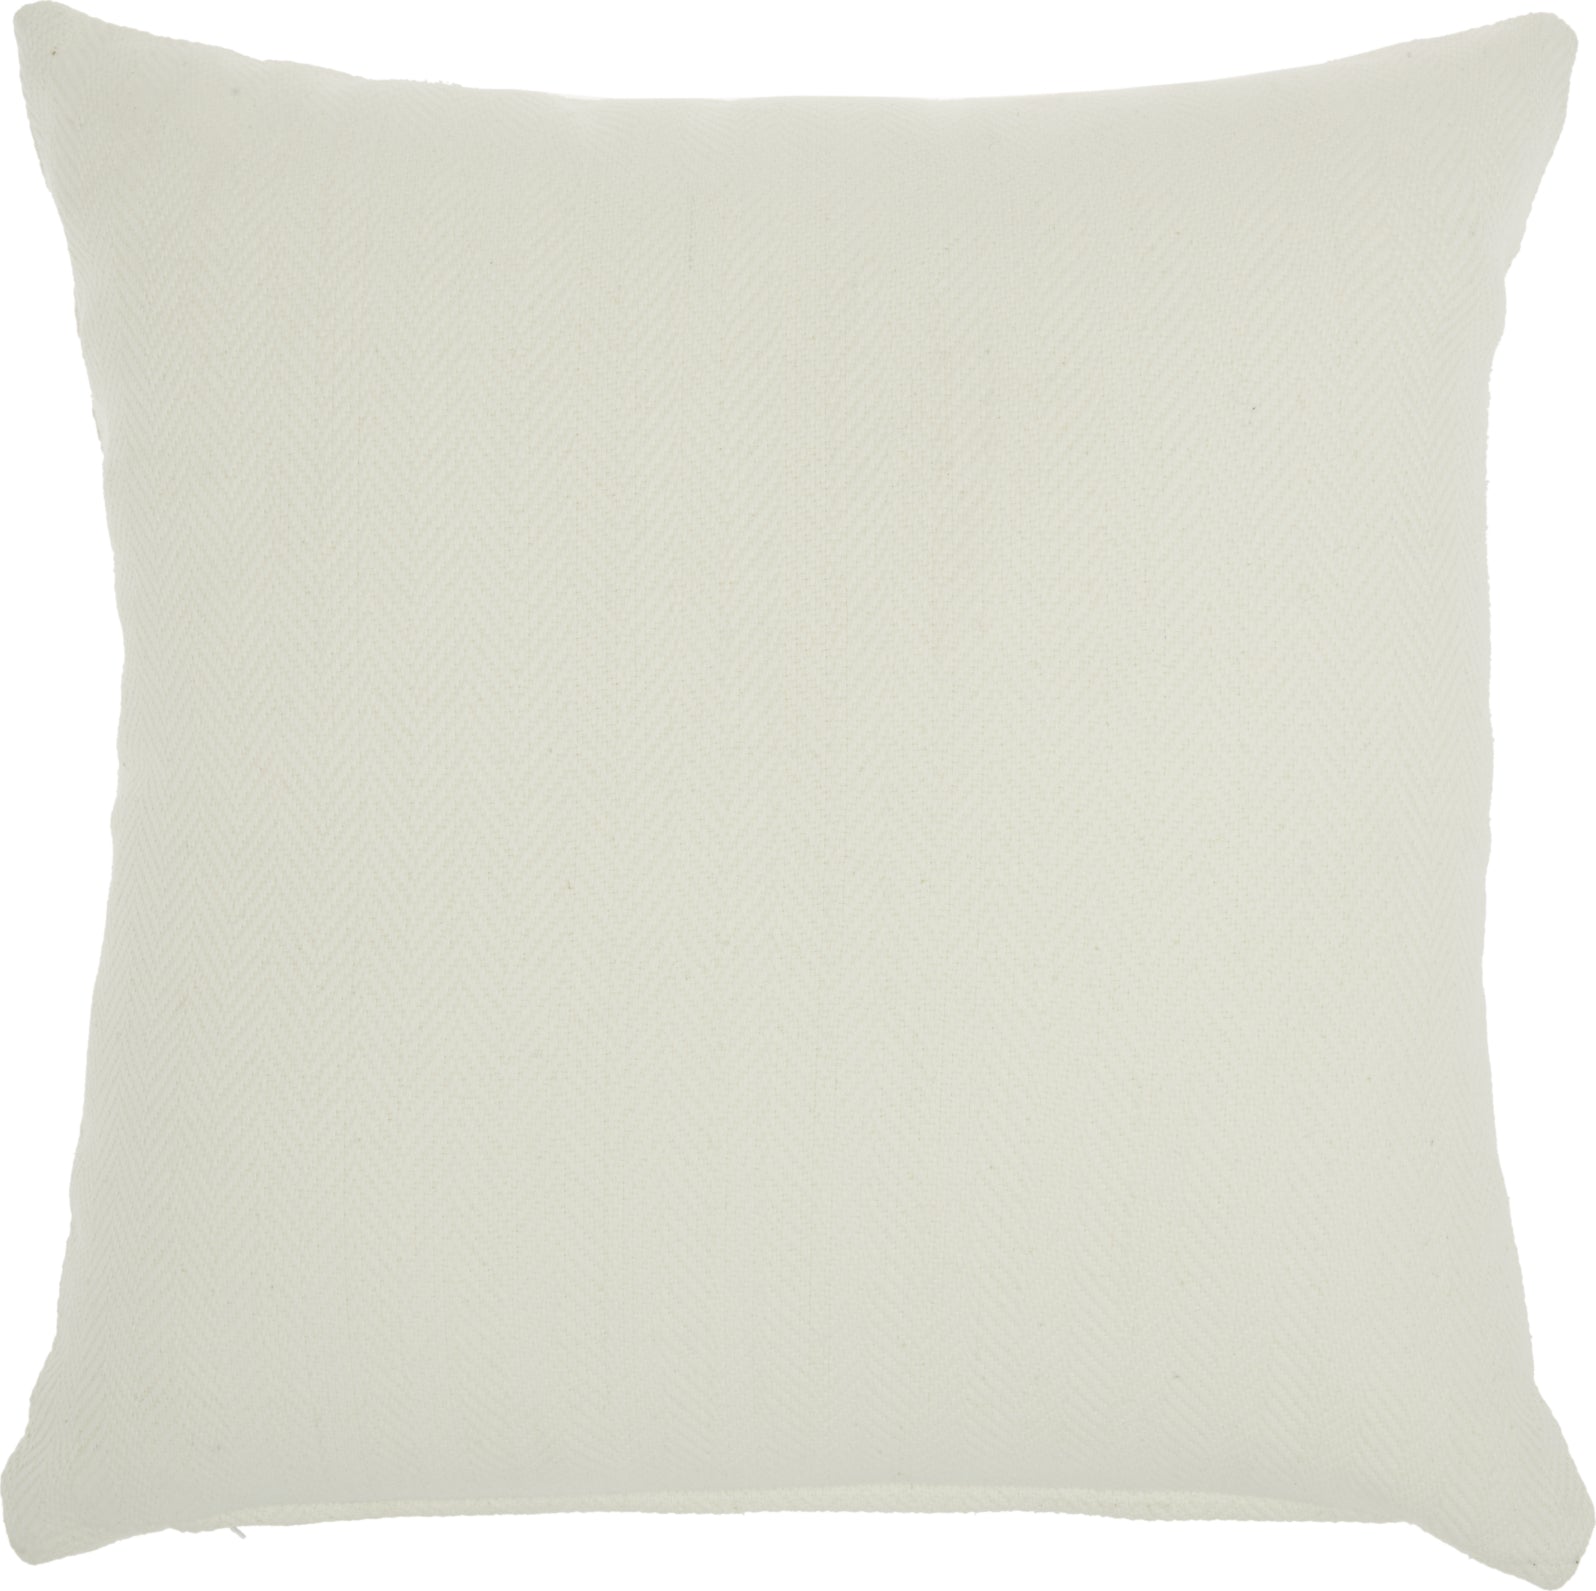 Nourison Outdoor Pillows Herringbone Solid Ivory by Mina Victory main image